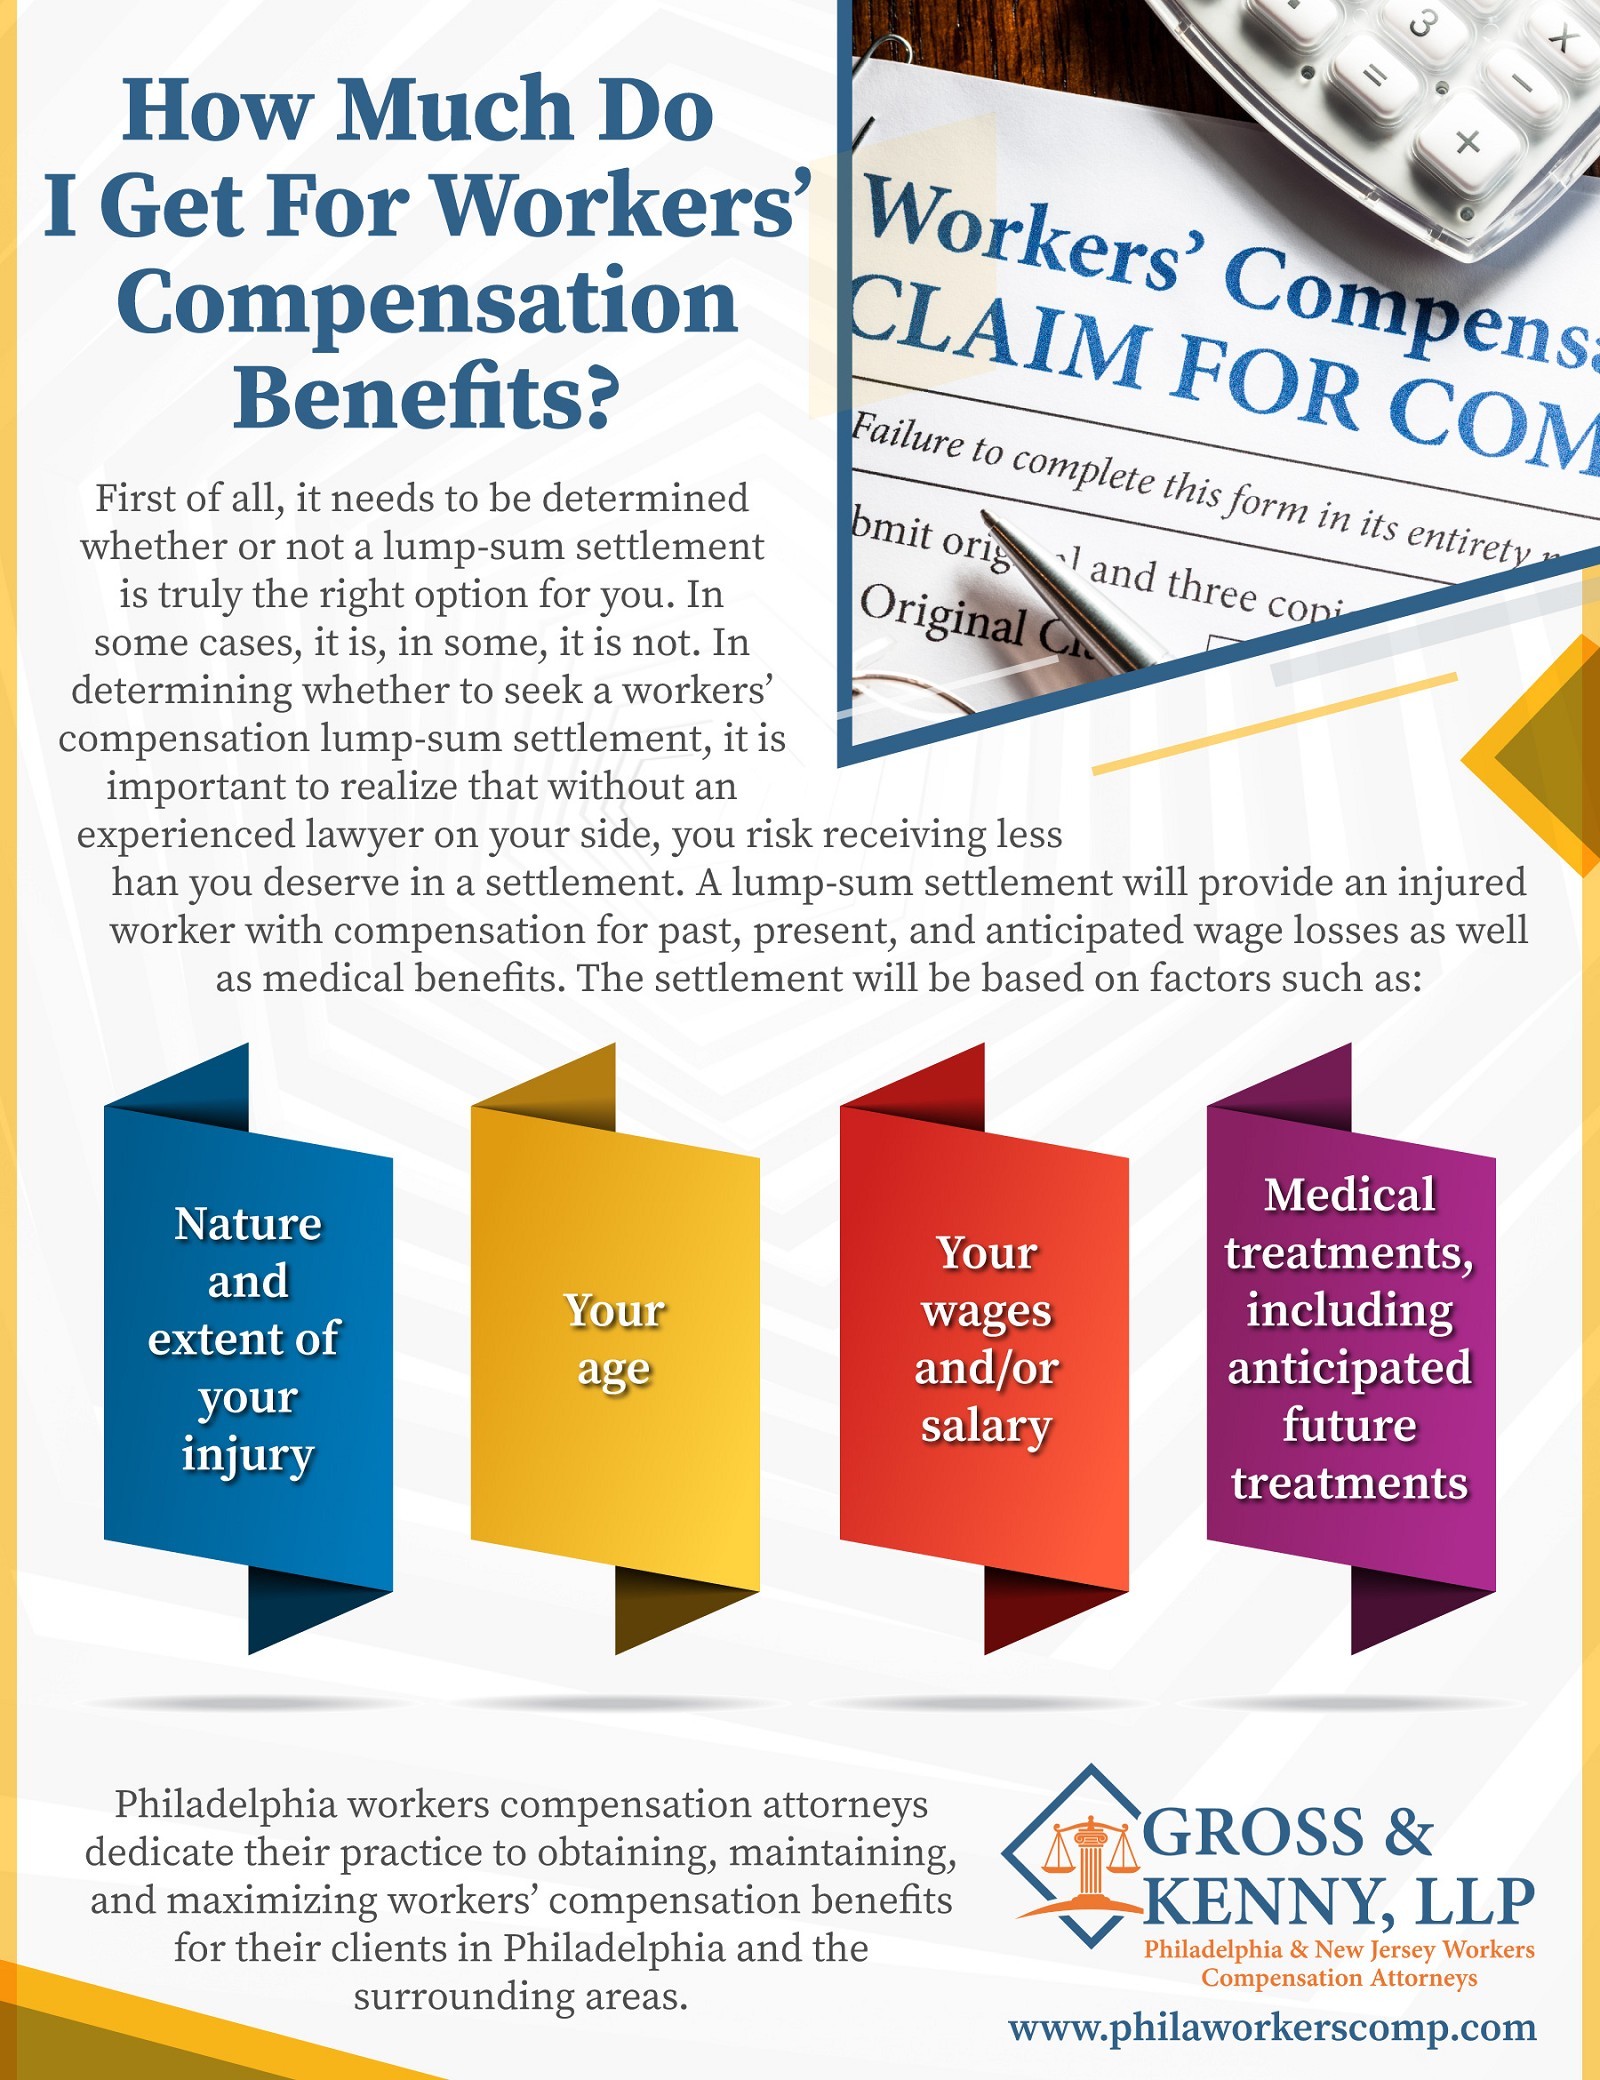 How Much Do I Get For Workers’ Compensation Benefits?